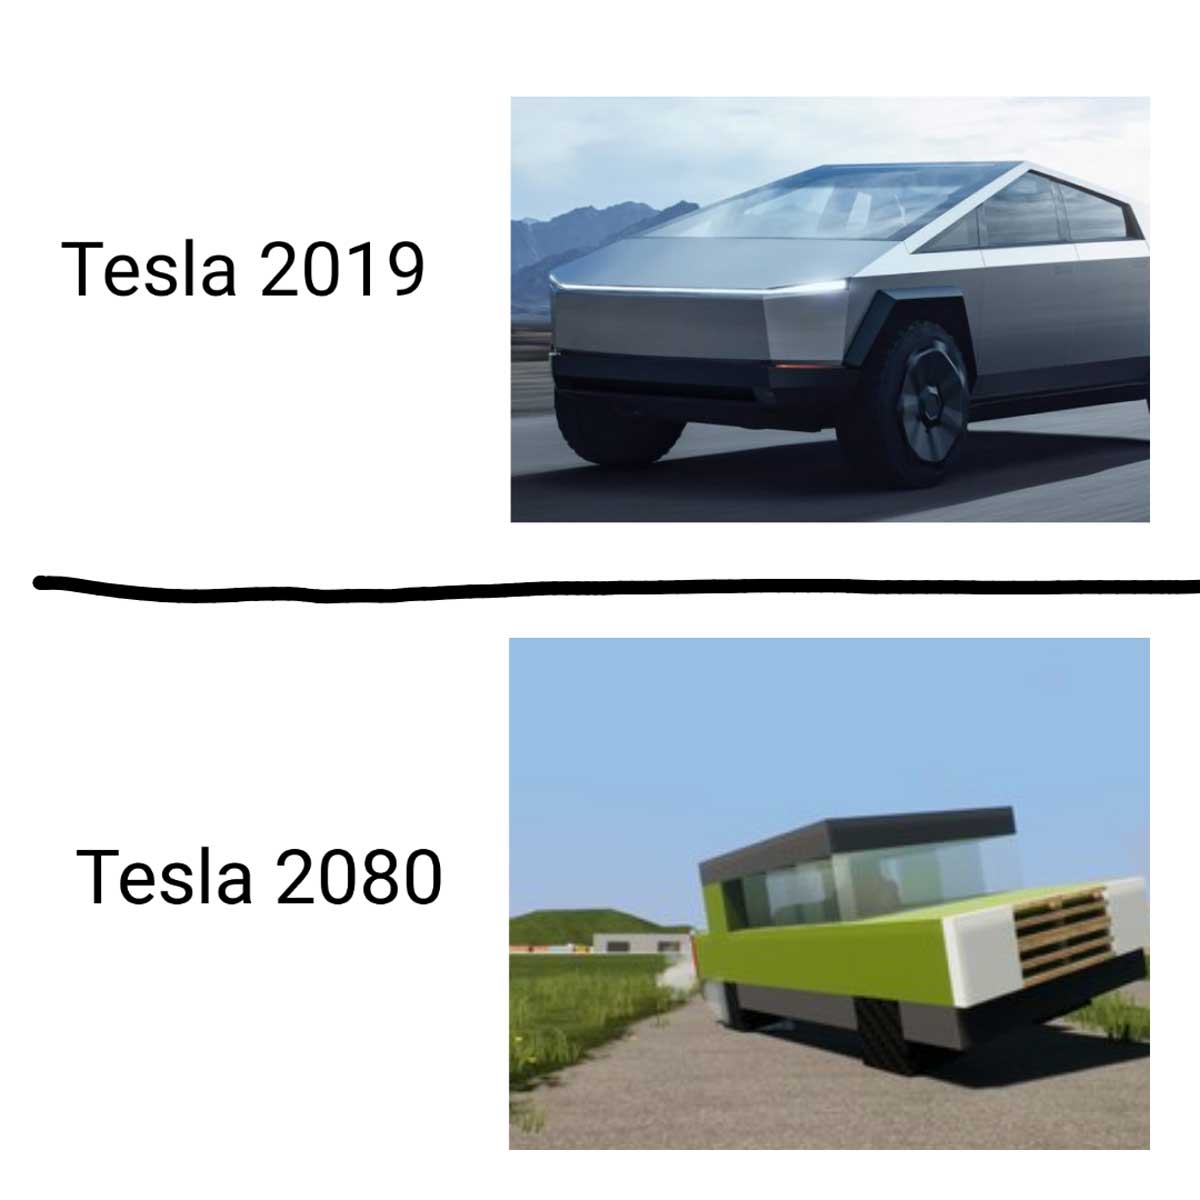 Picture of the new Tesla Cybertruck with the caption 'Tesla 2019' and a picture of an 8bit car in a video game with the caption 'Tesla 2080'